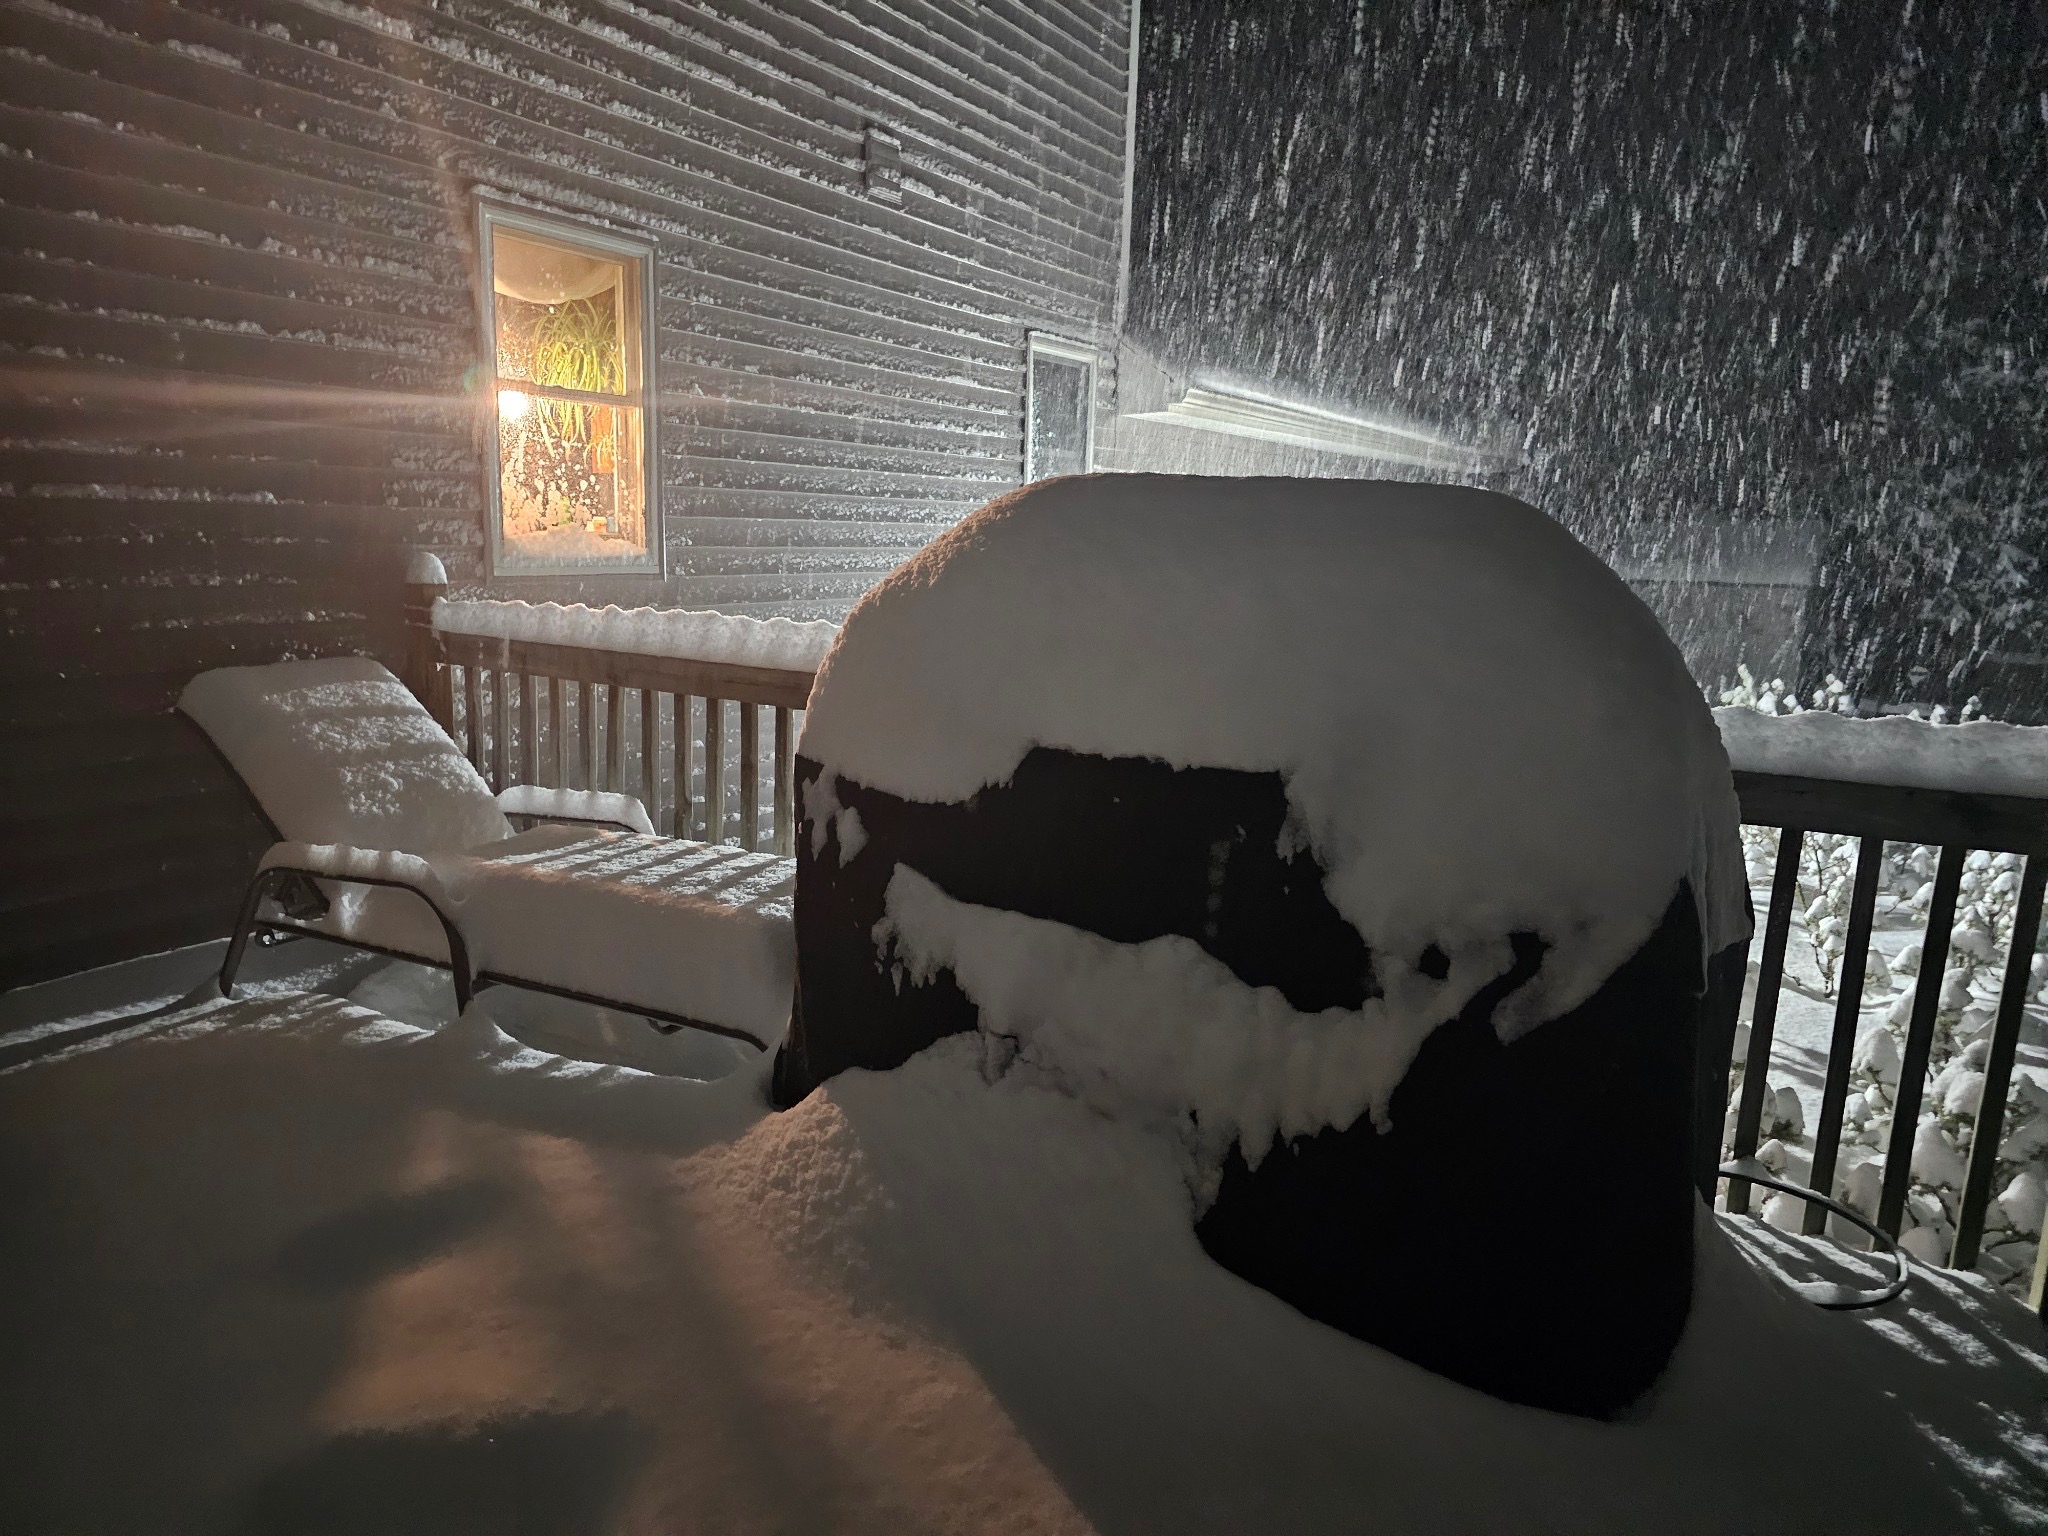 Heavy snow falling in a Wantage (Sussex) backyard the evening of January 6th where the storm total reached 13.5”(courtesy of Shawn Viggiano).